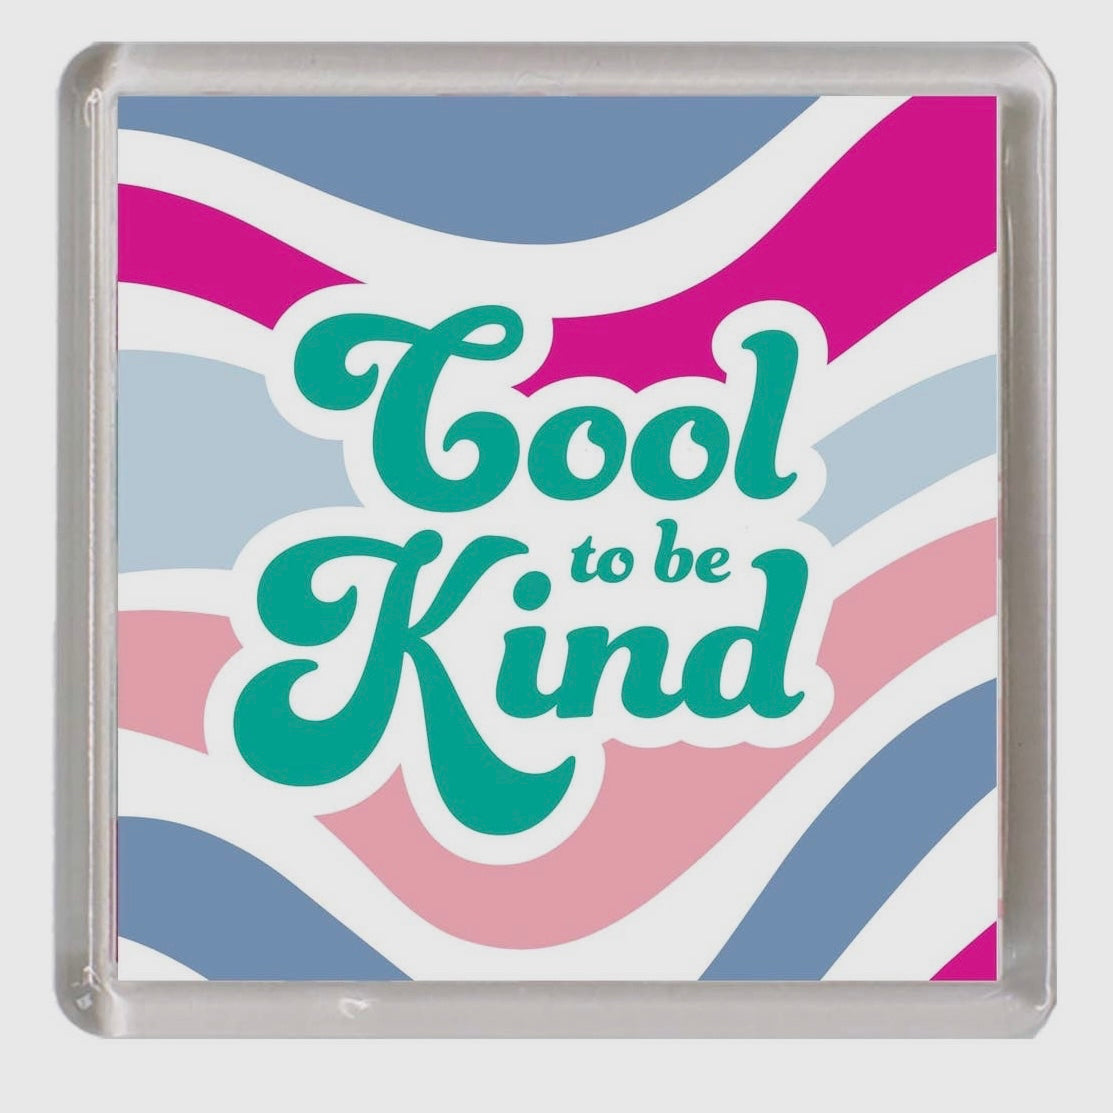 Inspirational Magnet By MS